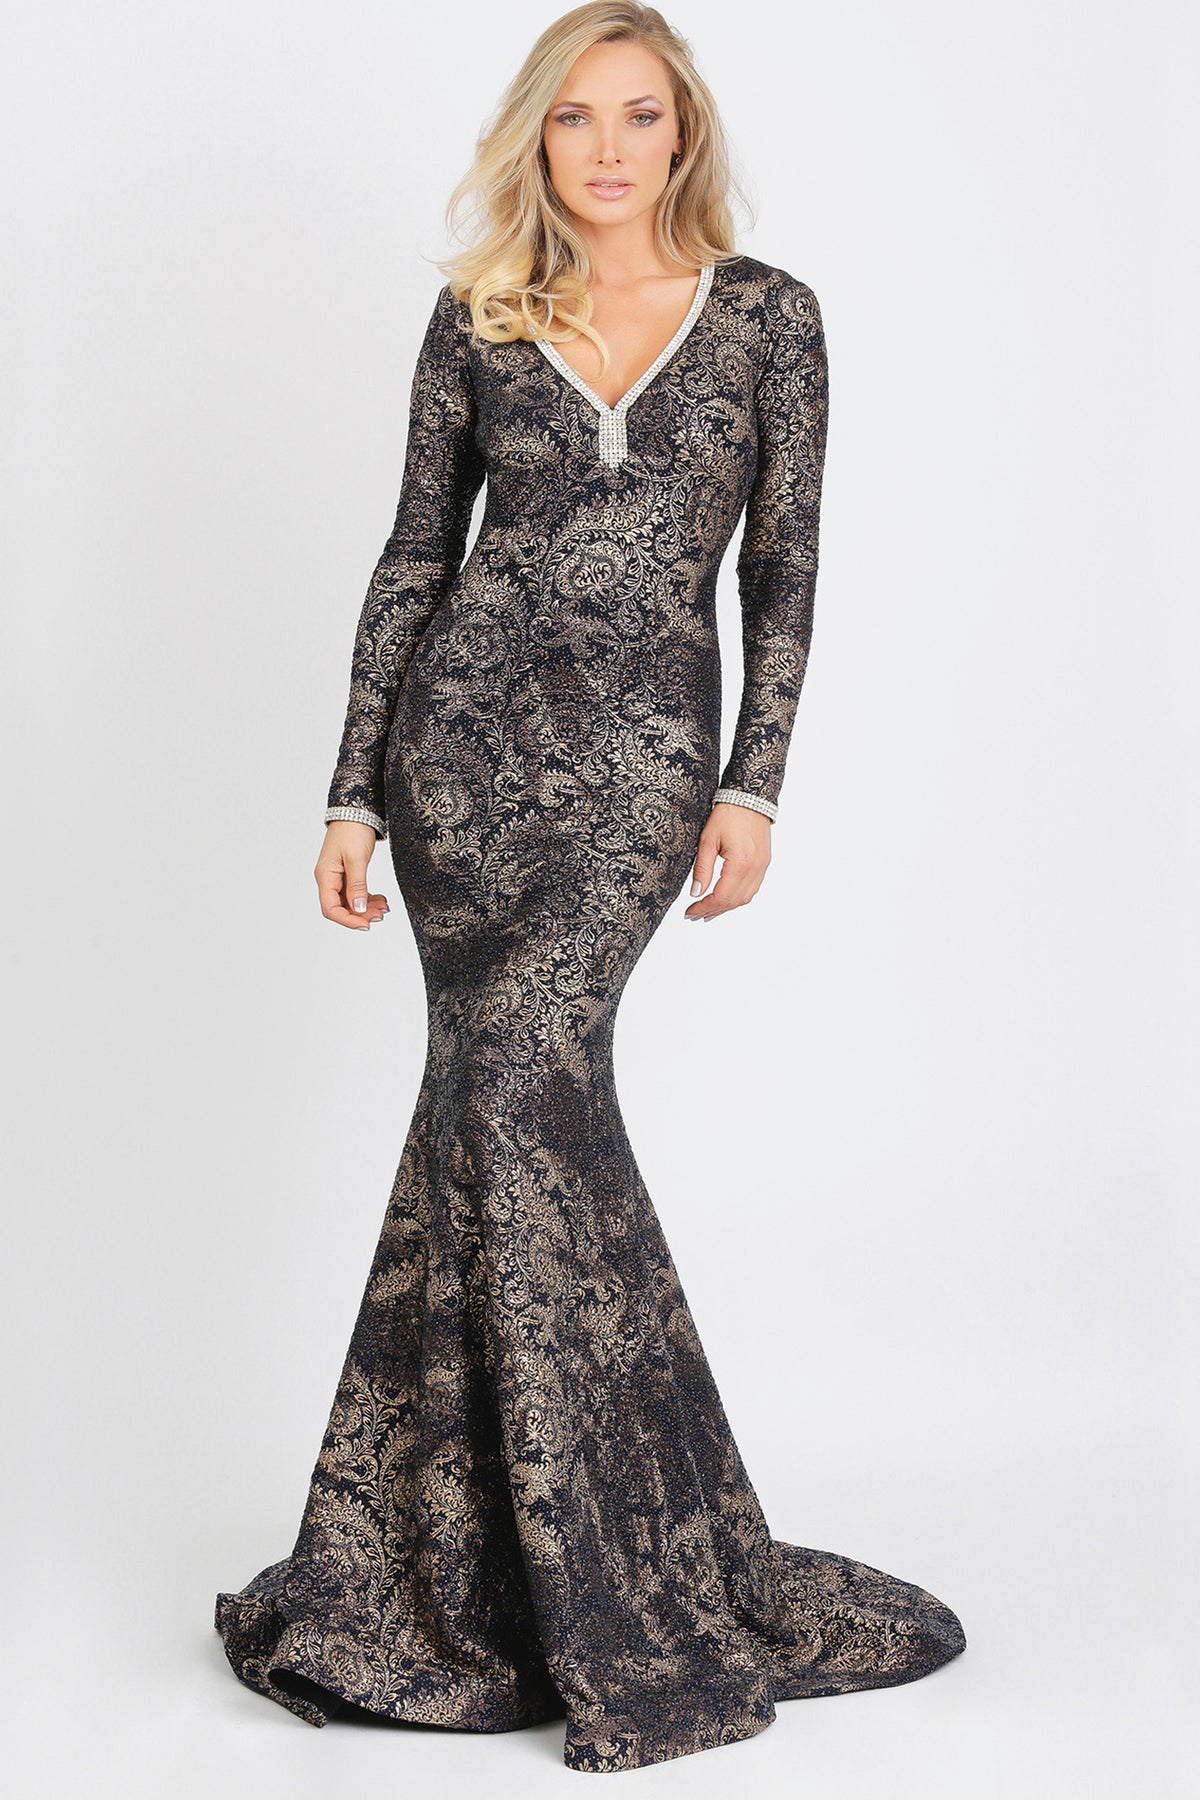 Ashley Glitter Spandex Metallic Jersey Long Dress. Gowns - BACCIO Couture